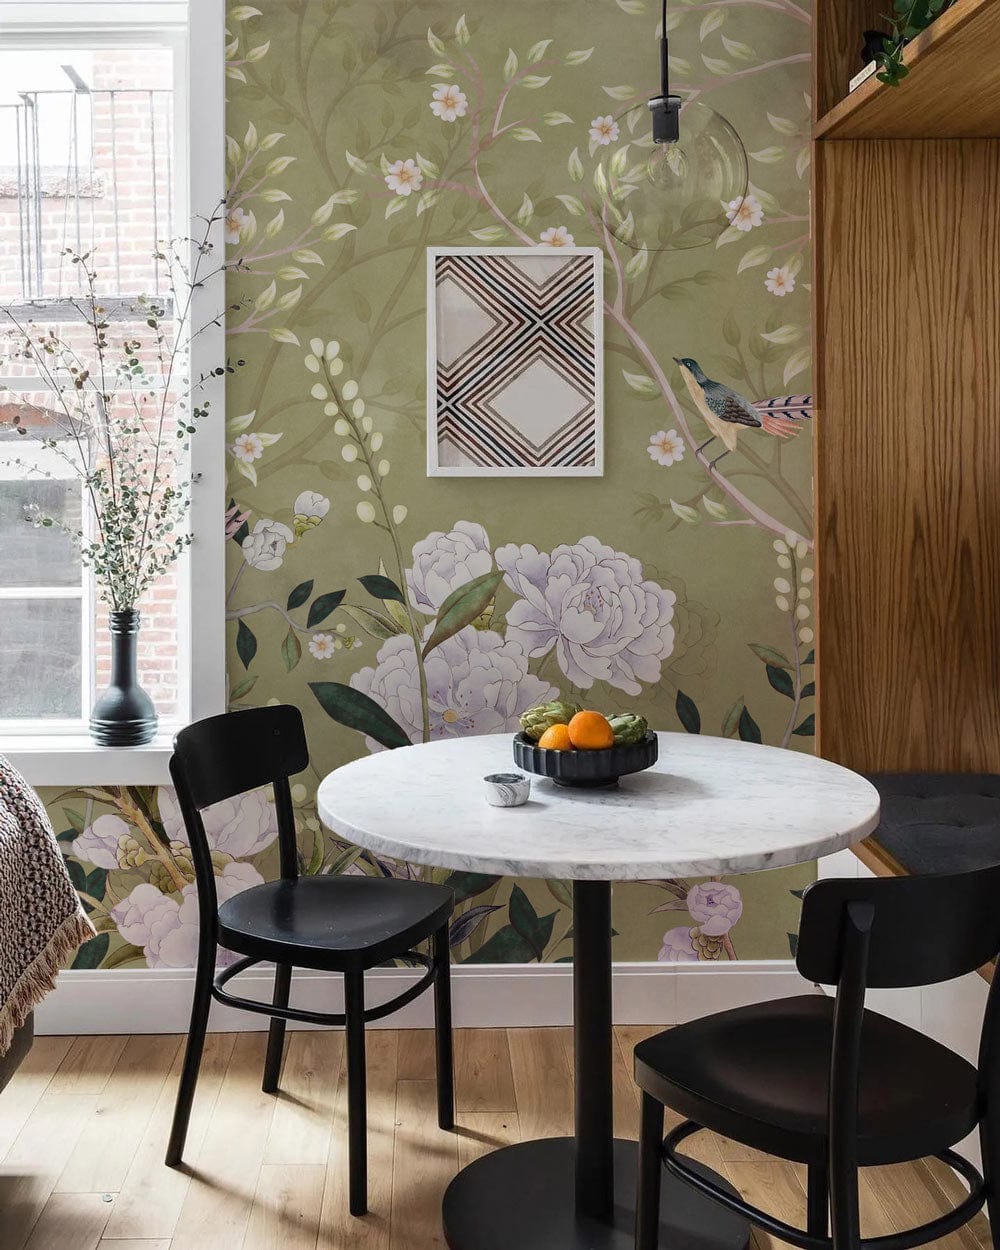 wall murals with fresh flowers and beautiful birds for a relaxing environment